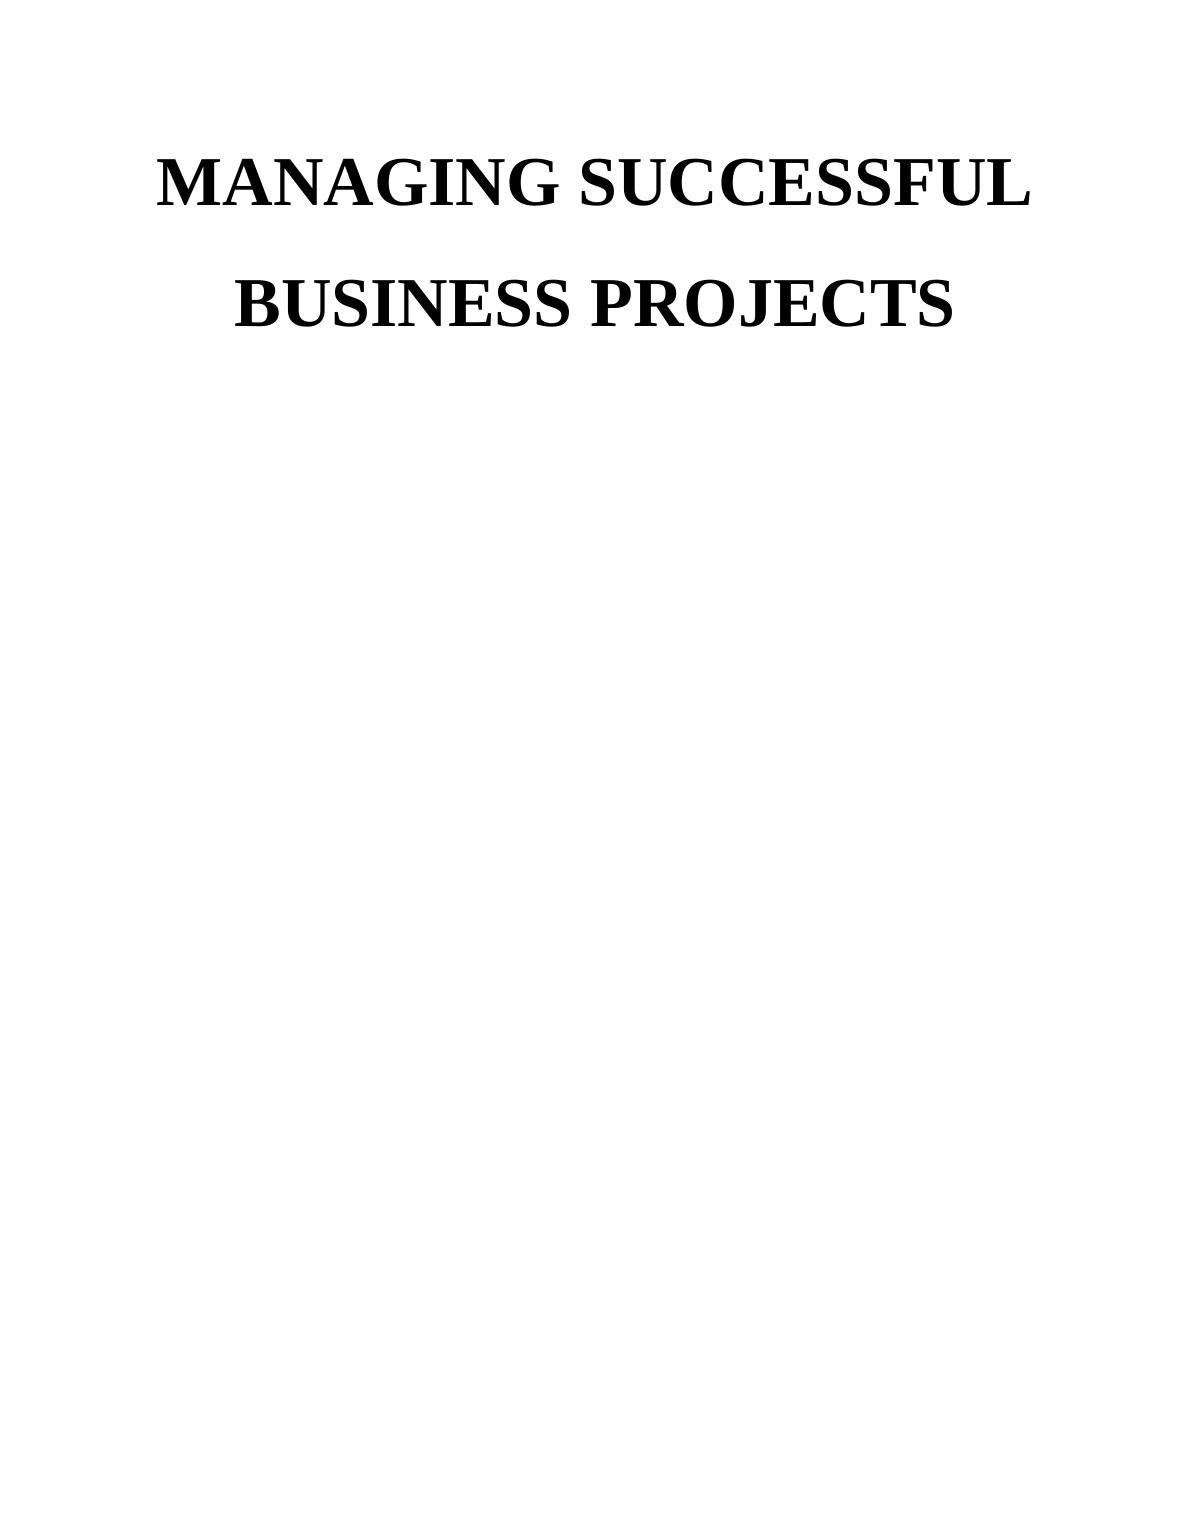 MANAGING SUPERCCESSFUL BUSINESS PROJECTS TABLE OF CONTENTS INTRODUCTION 1 LO 1 1 P1. Project Management Plan 2 P3. Work Breakdown Structure and Gantt Chart 4 LO 2 6 P5_1